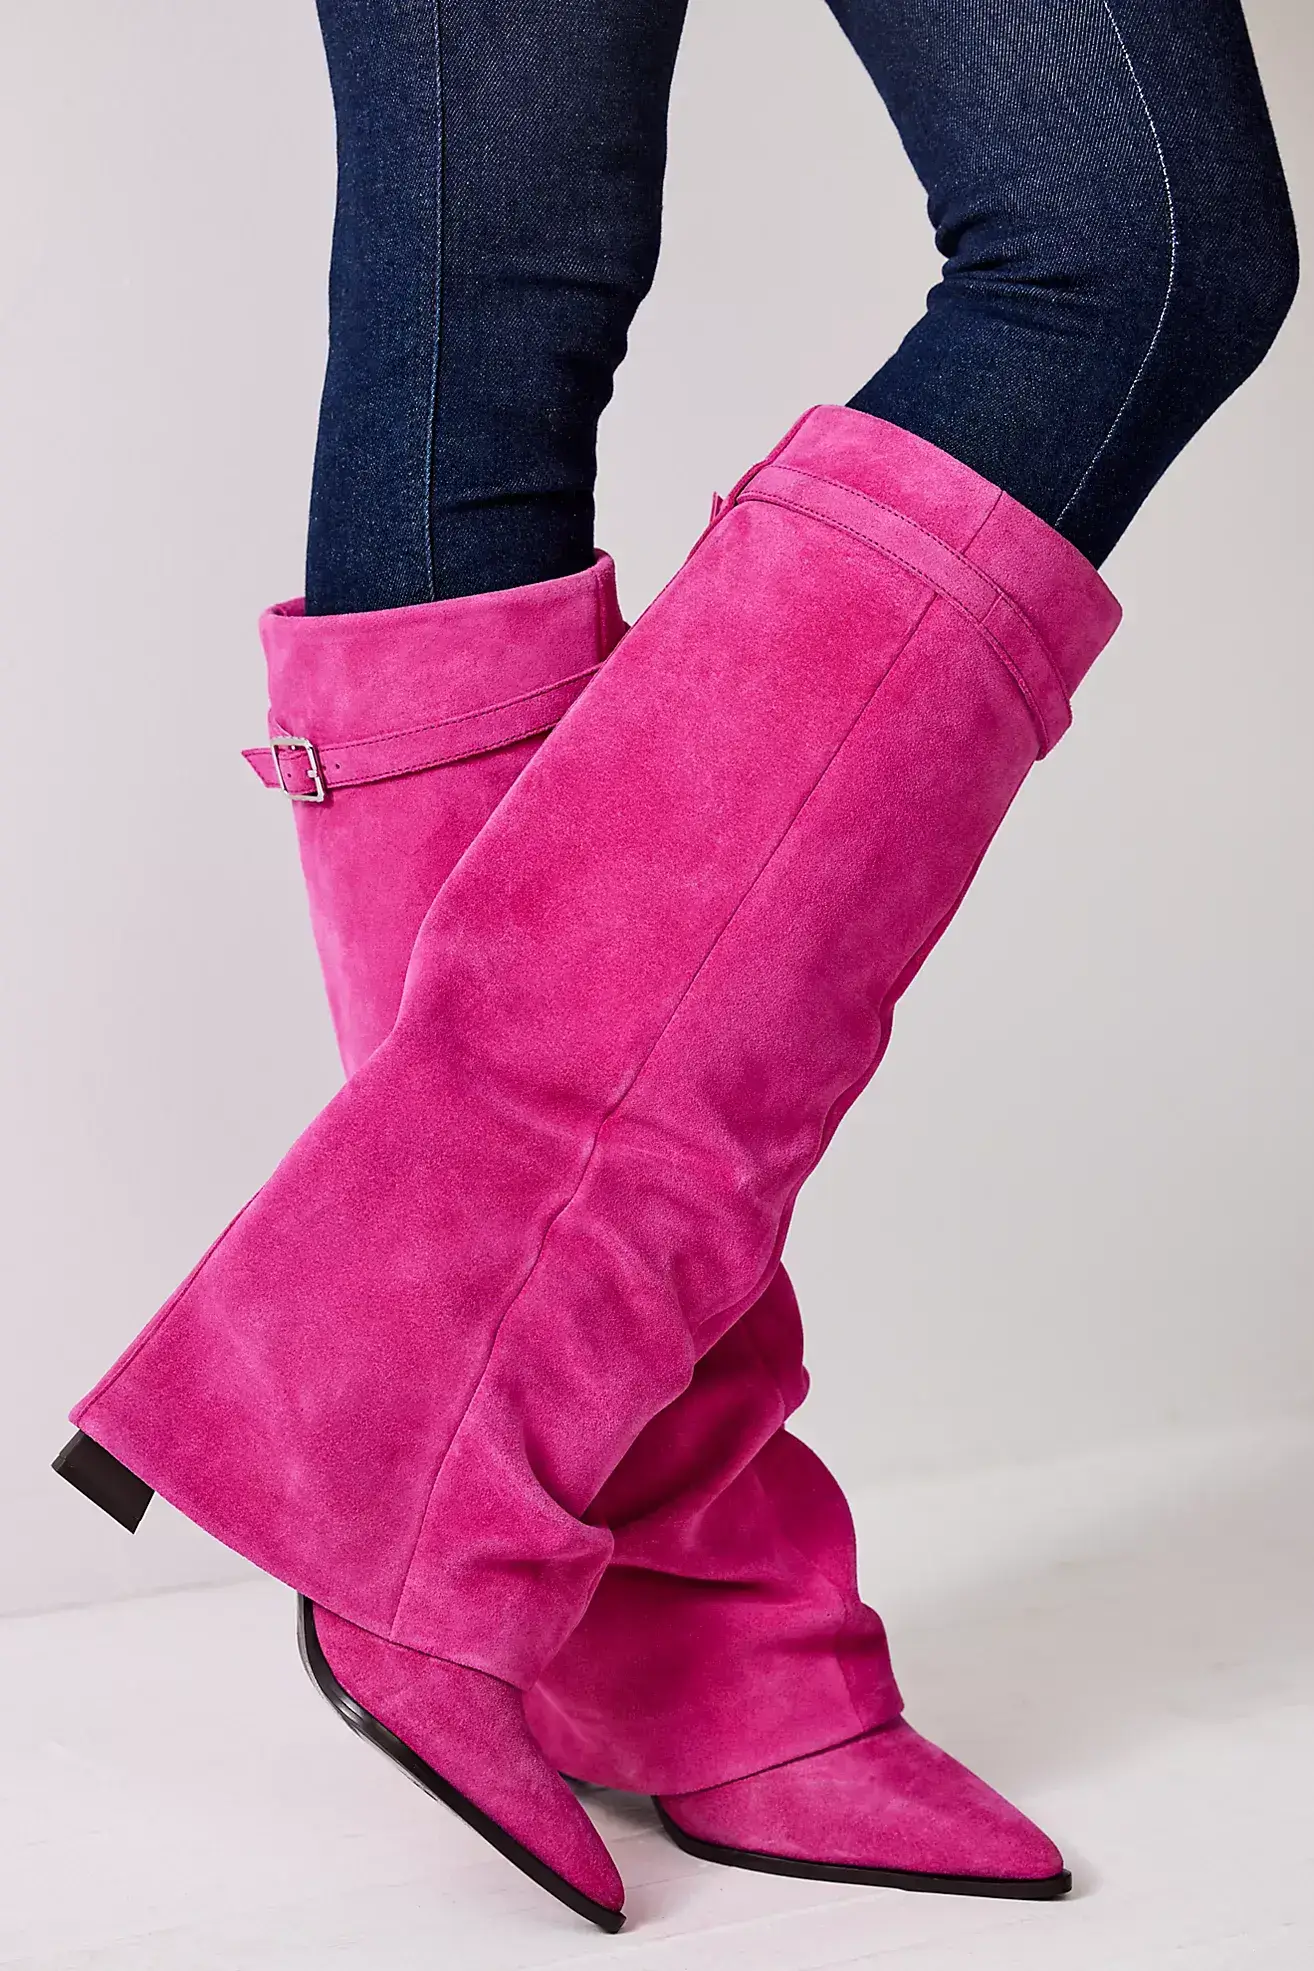 Shoes We Are Loving At Free People Magenta Suede Foldover Boots must have boots for fall the best fall boots personal stylists share favorite fall boots the best suede boots how to wear brightly colored boots how to add color to your look with boots trendy boots for fall and winter